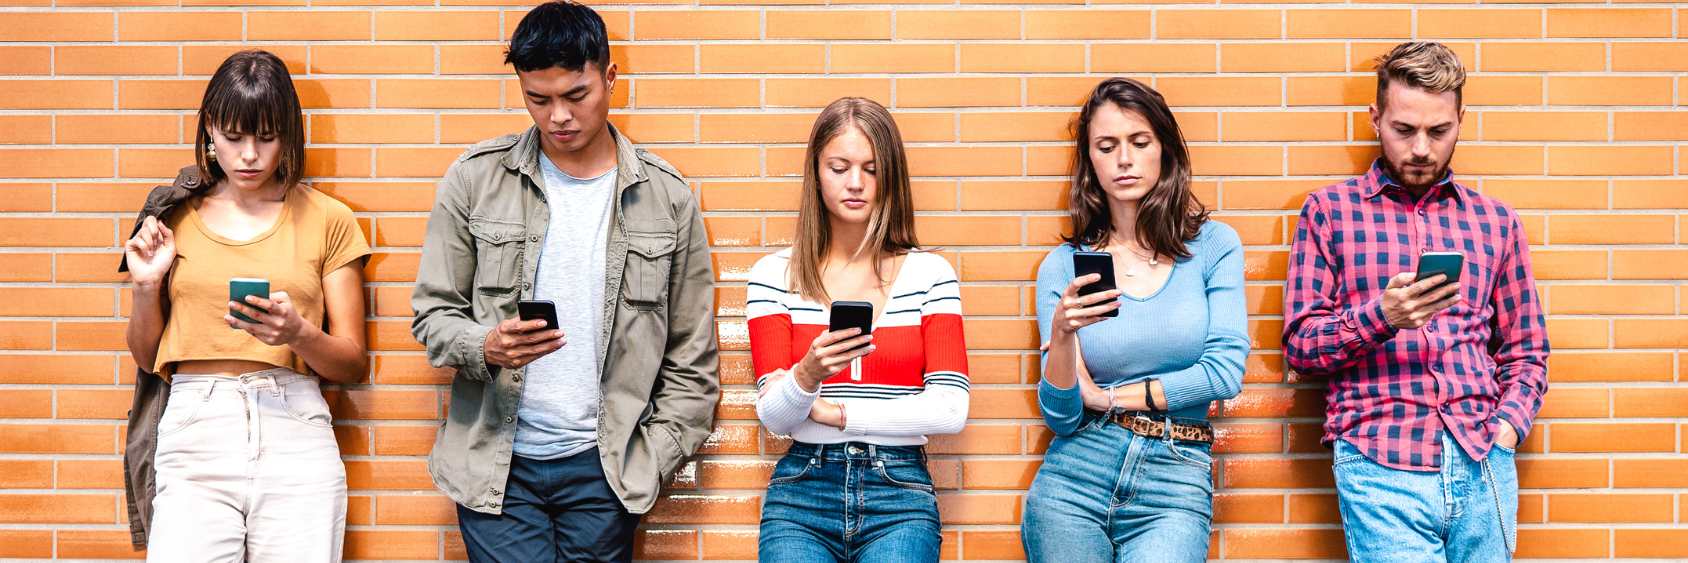 Struggling to connect with Gen Z renters? Here’s how (and why) you need to adjust your multifamily marketing strategy for this generation.